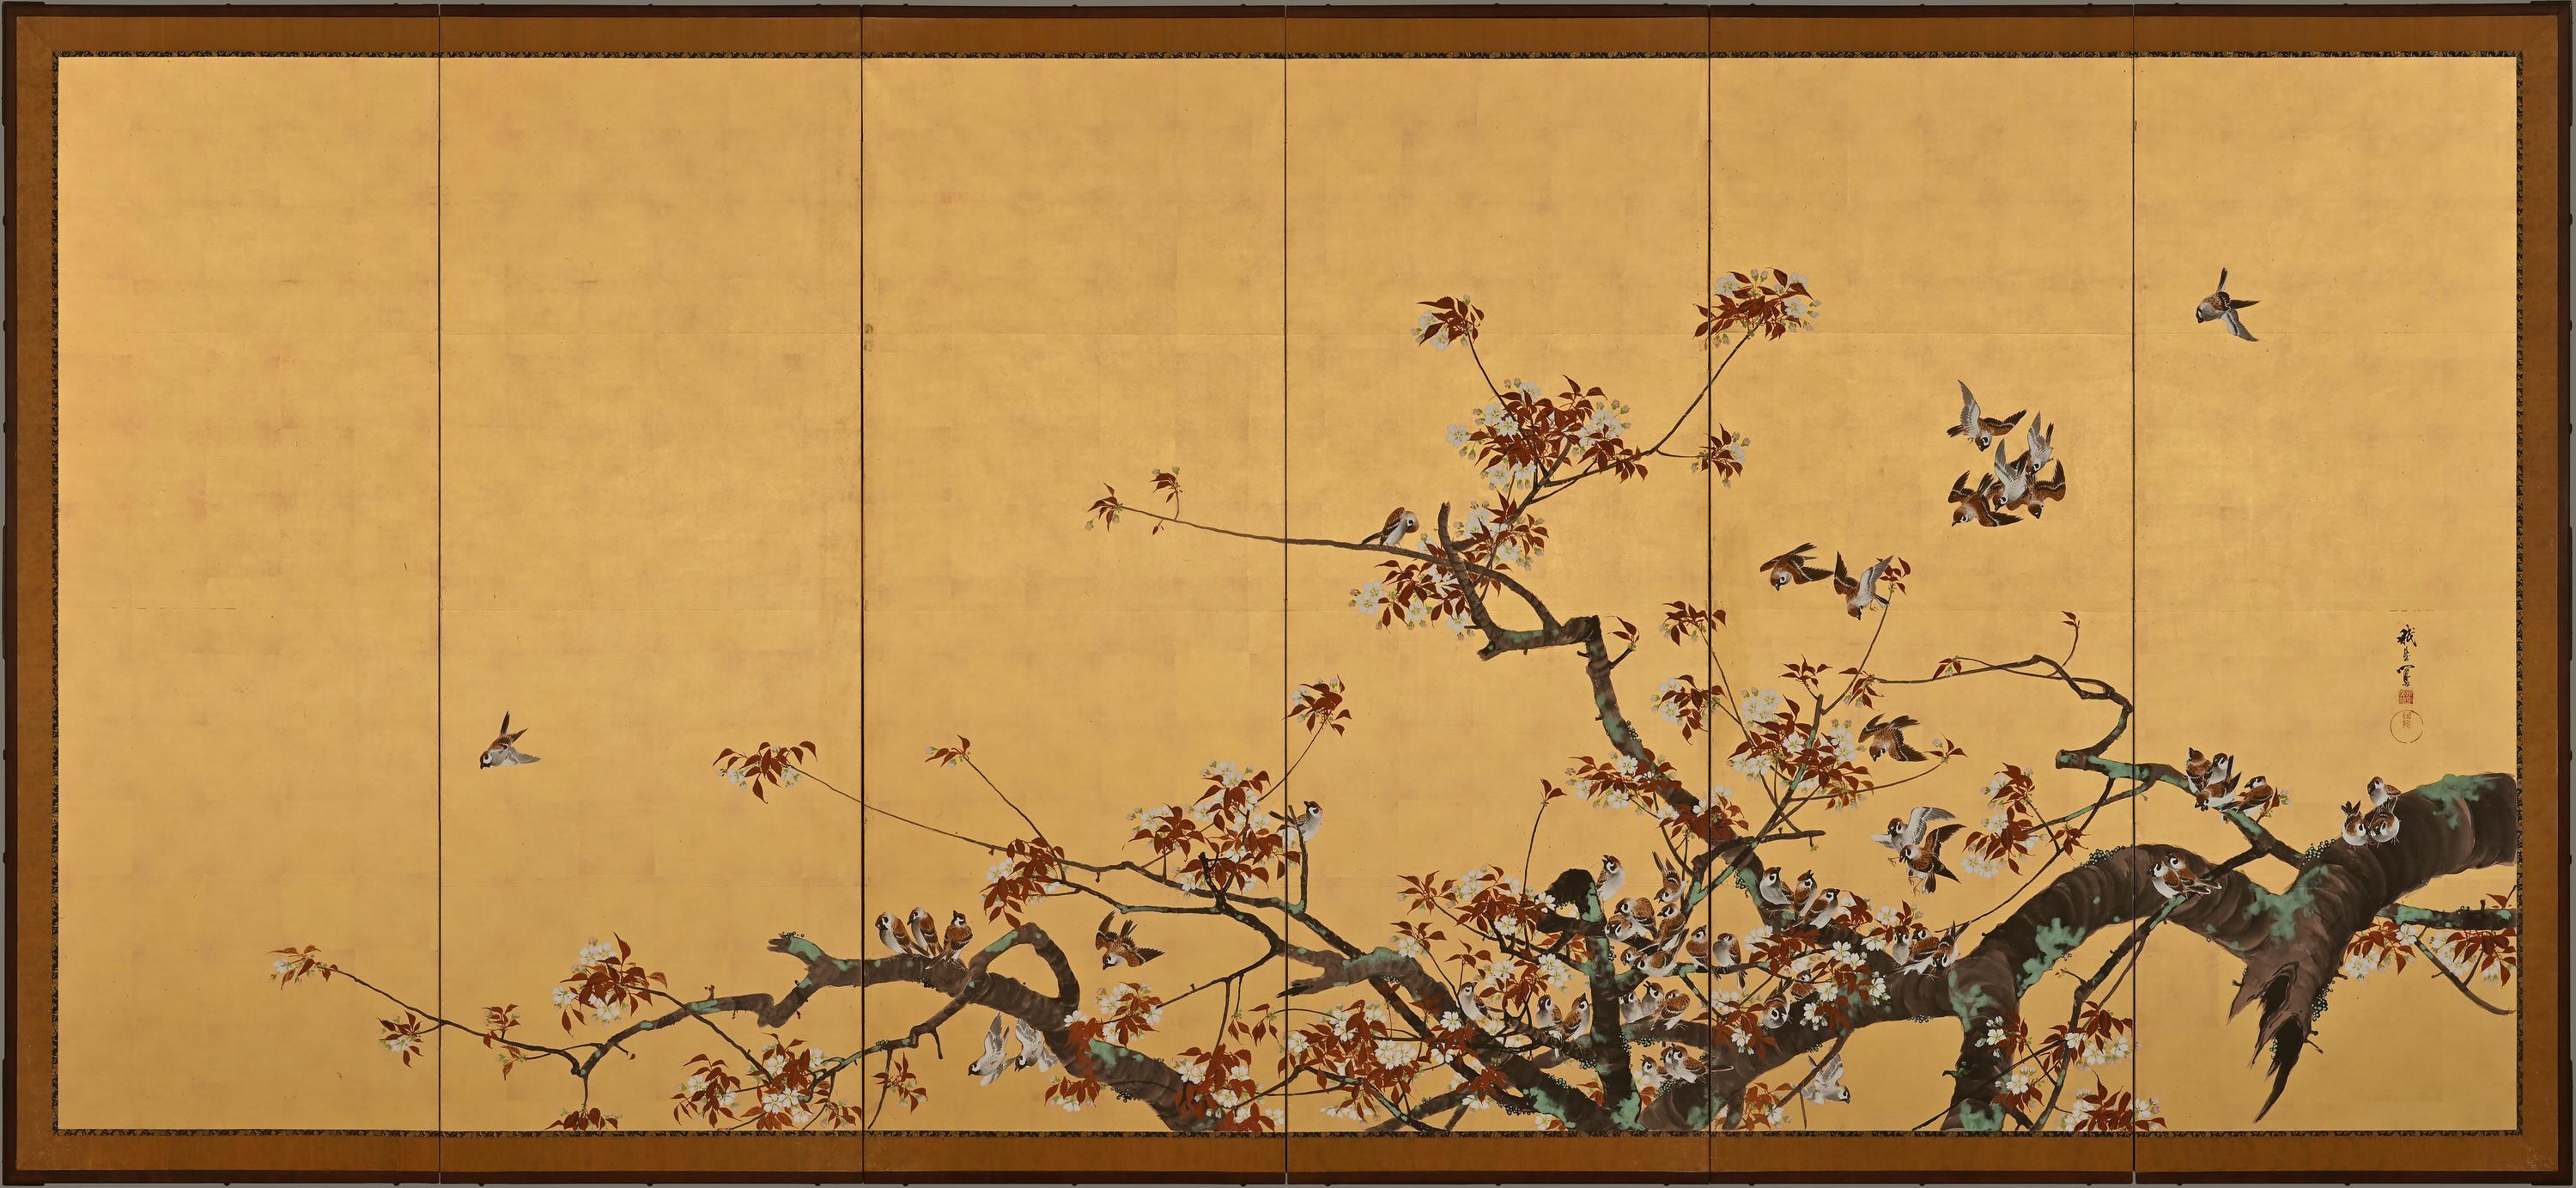 Flowers & Birds of Spring and Autumn

Unknown artist.

Japan. Meiji period, circa 1900.

A pair of six-fold screens. Ink, color, gofun and gold leaf on paper.

Signed: Gaga Sha

Top Seal: Minamoto Shoji In

Bottom Seal: